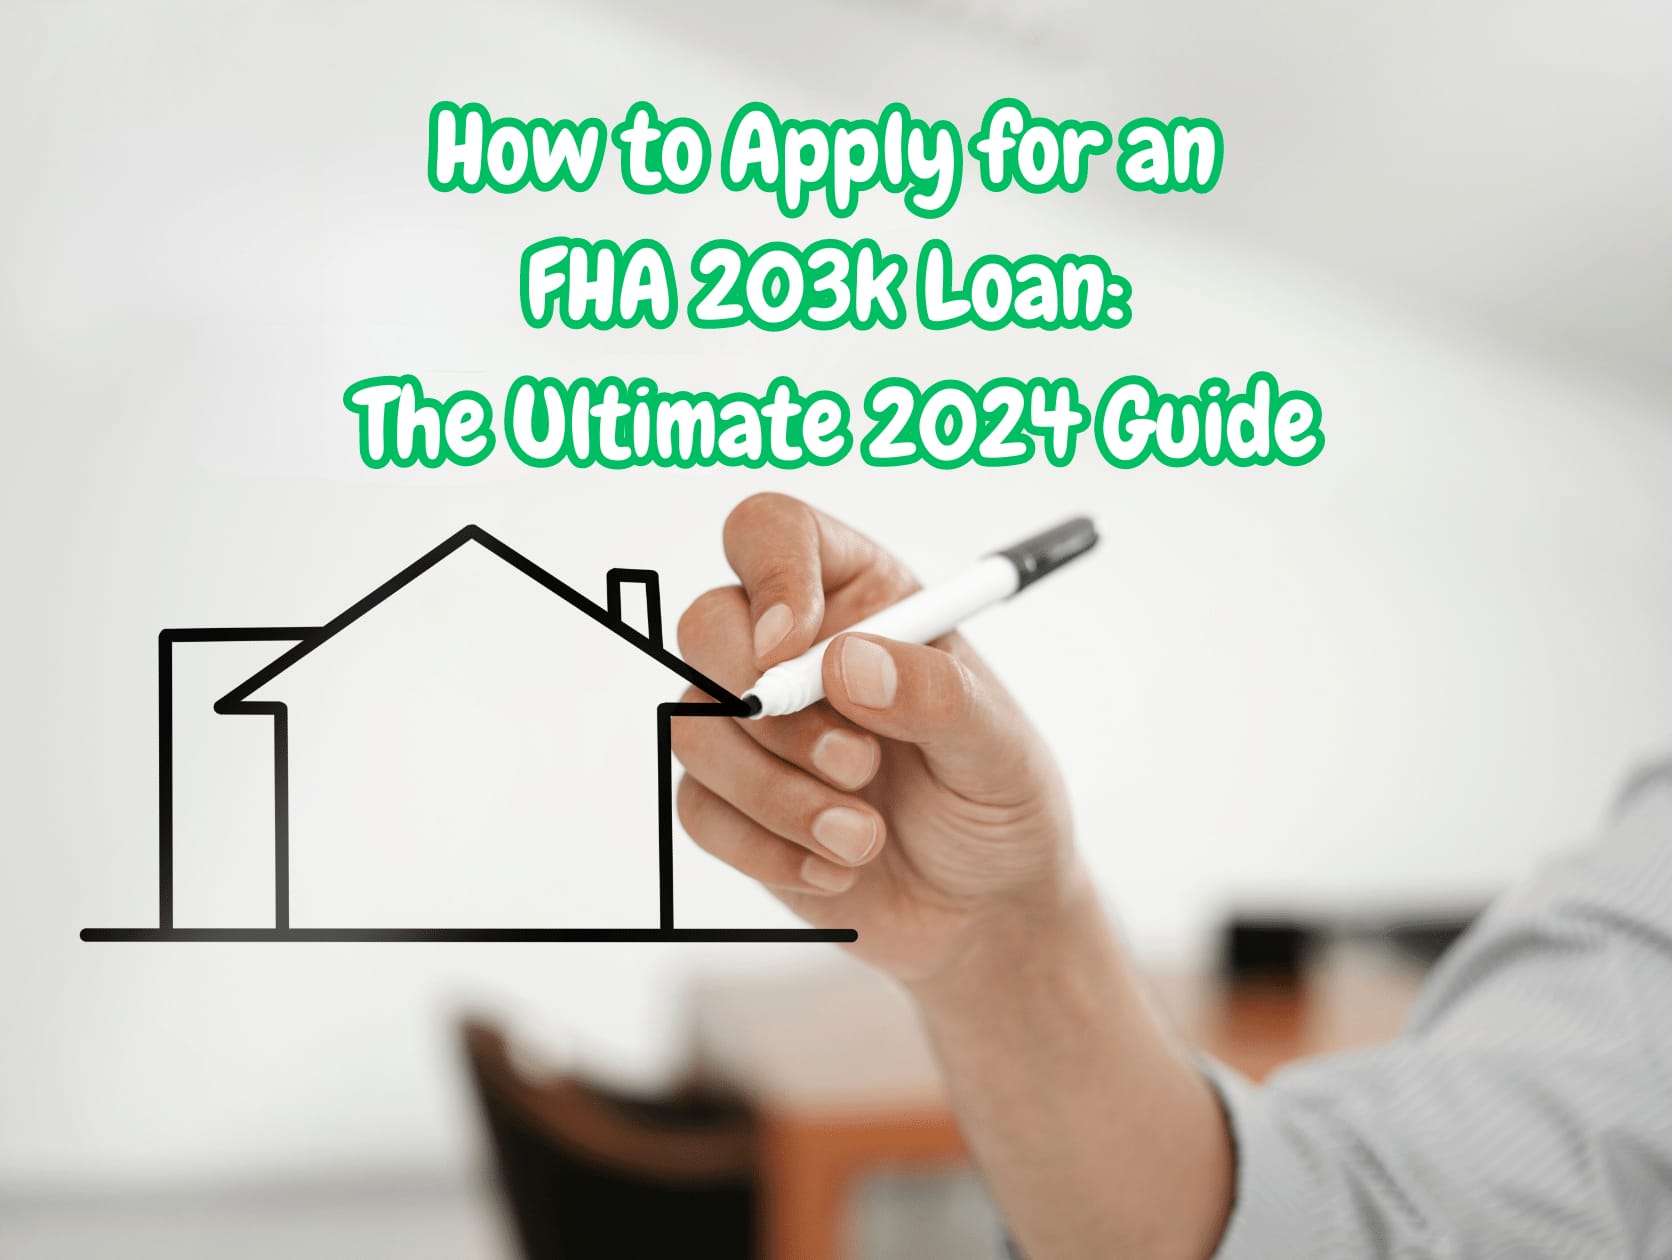 Guide on how to apply for an FHA 203k loan